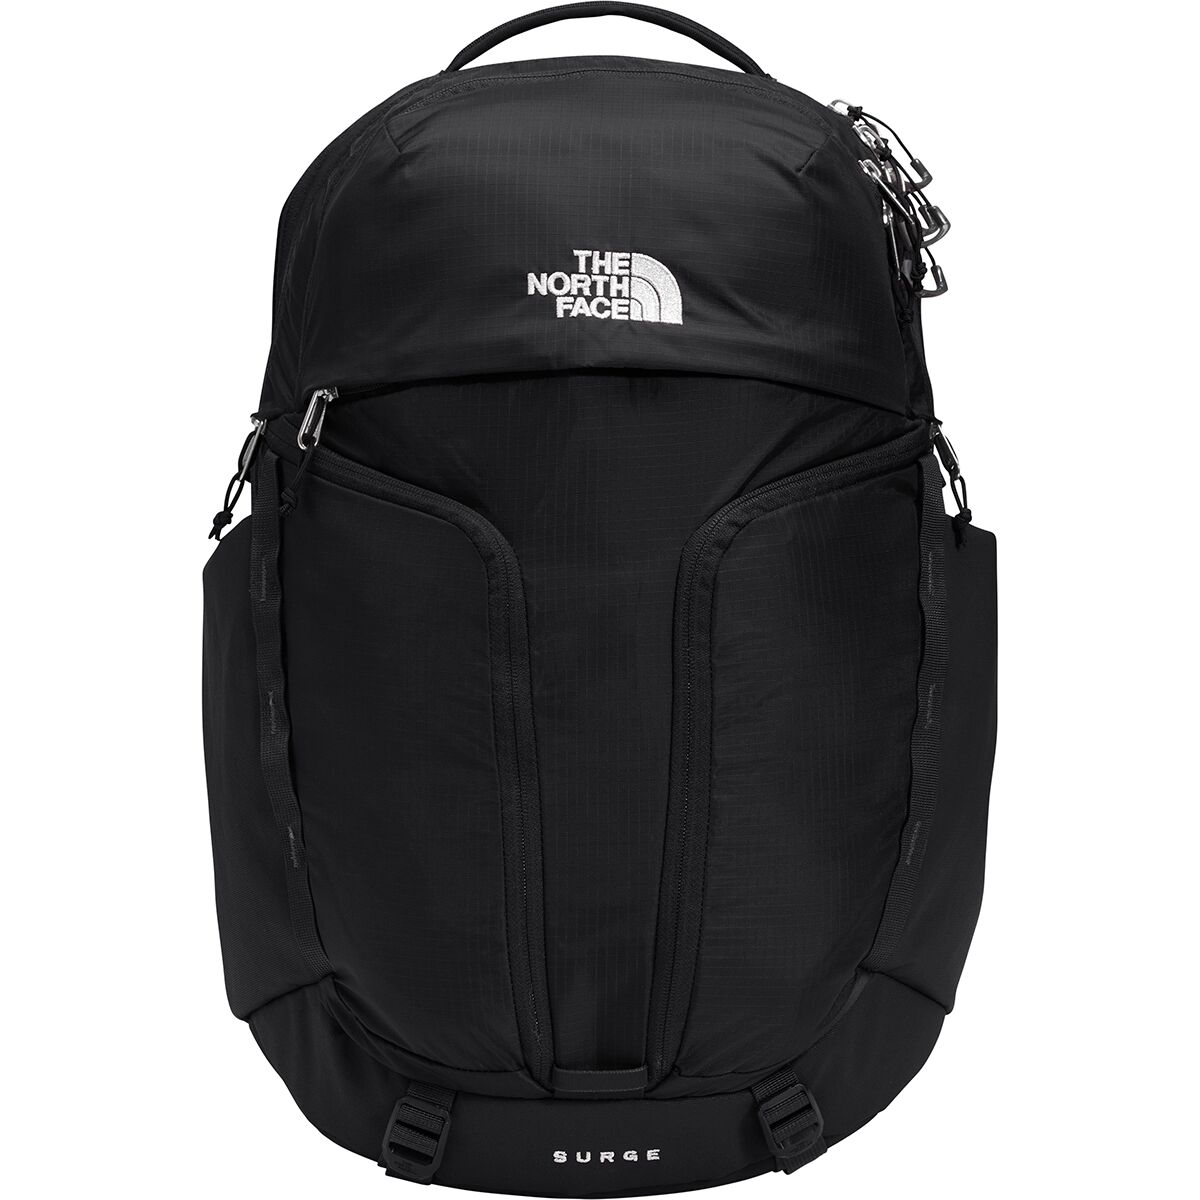 The North Face Surge 31L Backpack - Women's